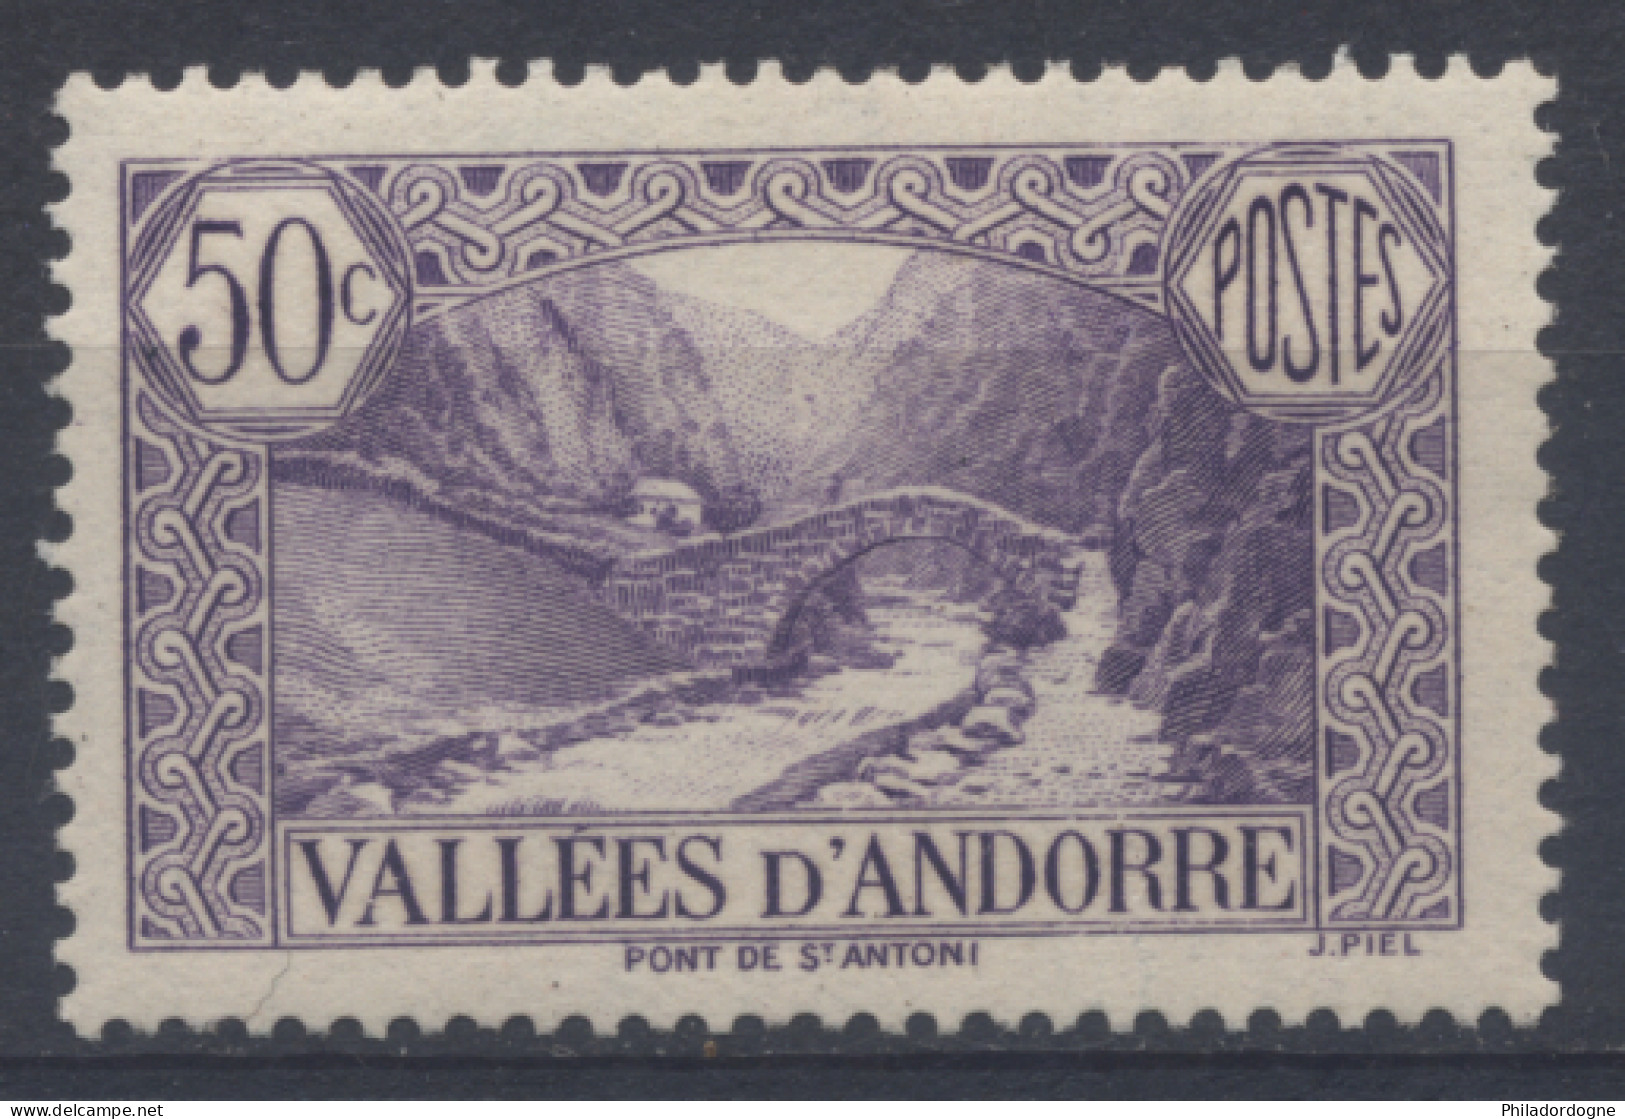 Andorre - Yvert N° 64 Neuf Et Luxe (MNH) - Cote 12,5 Euros - Unused Stamps